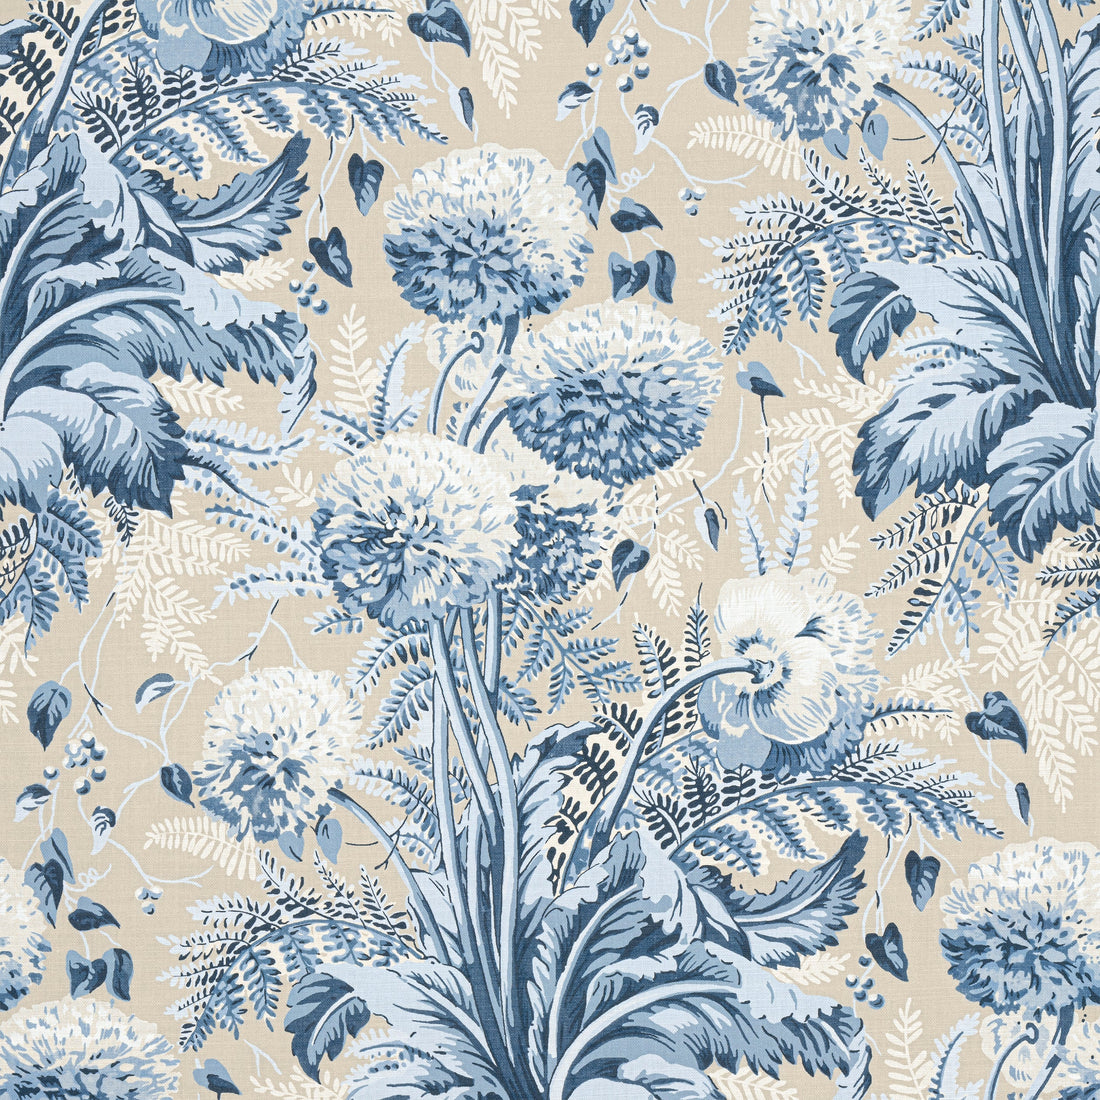 Dahlia fabric in Navy on Linen color - pattern number AF24540 - by Anna French in the Devon collection